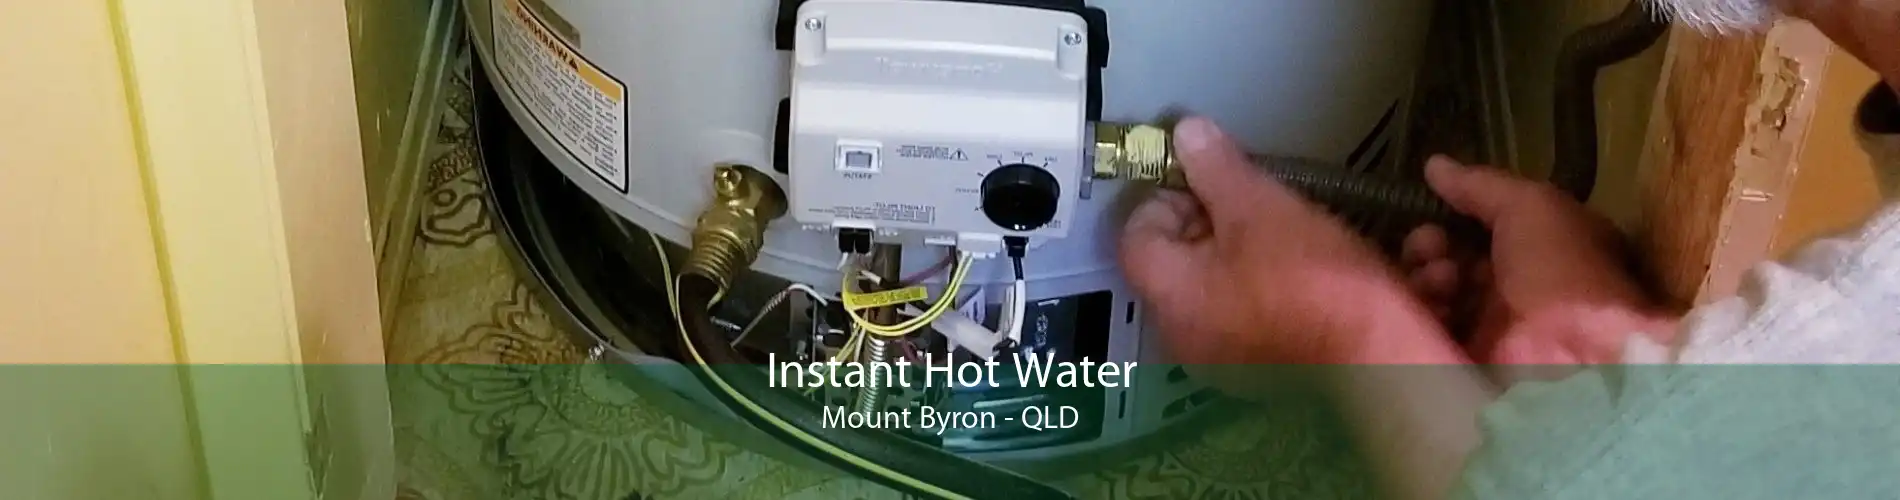 Instant Hot Water Mount Byron - QLD